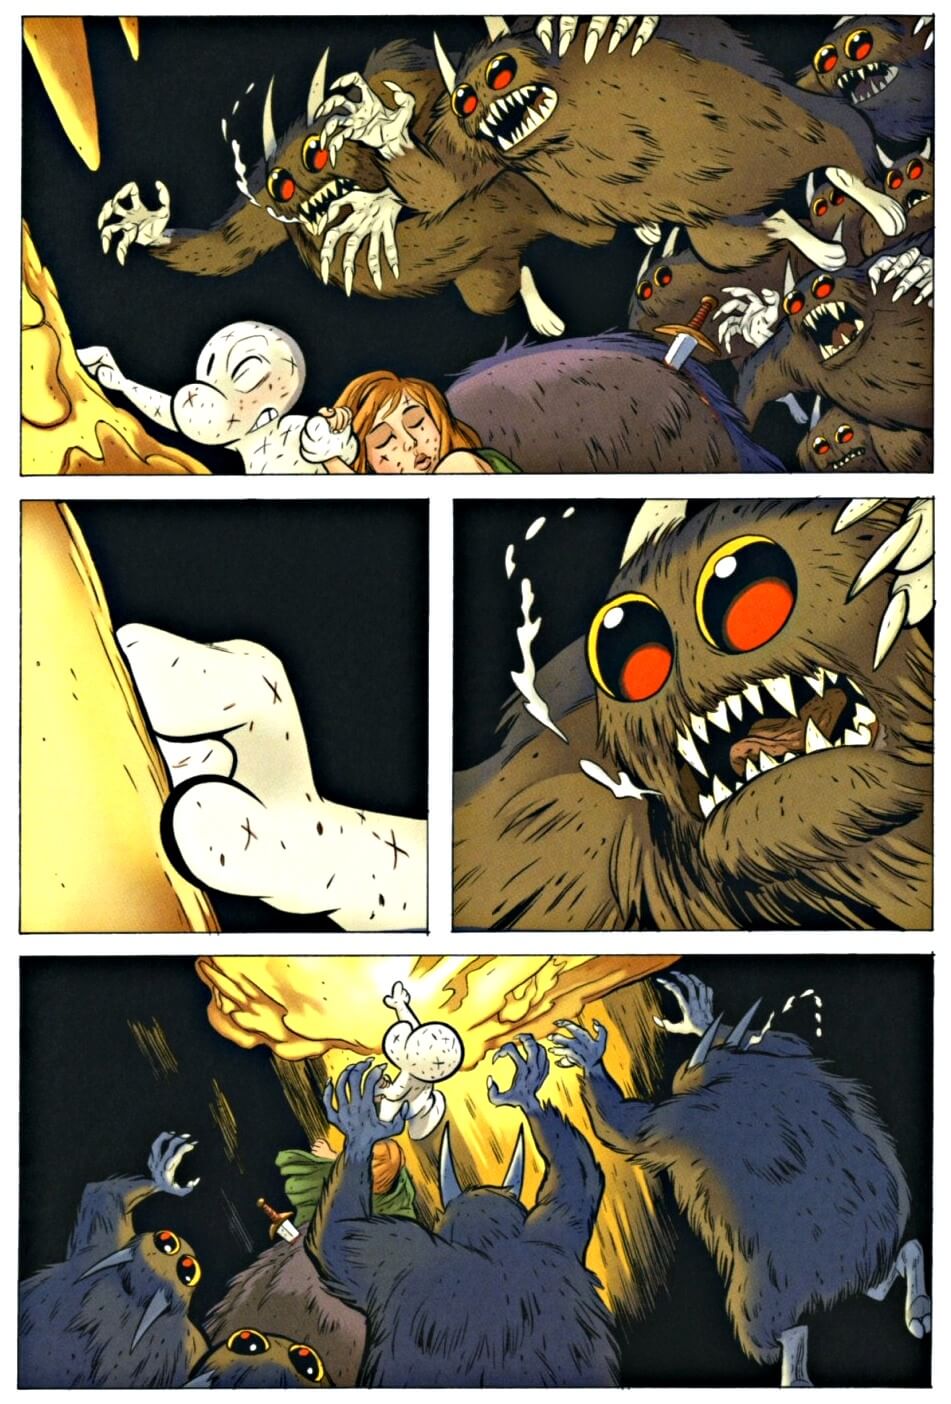 page 155 chapter 5 of bone 9 crown of horns graphic novel